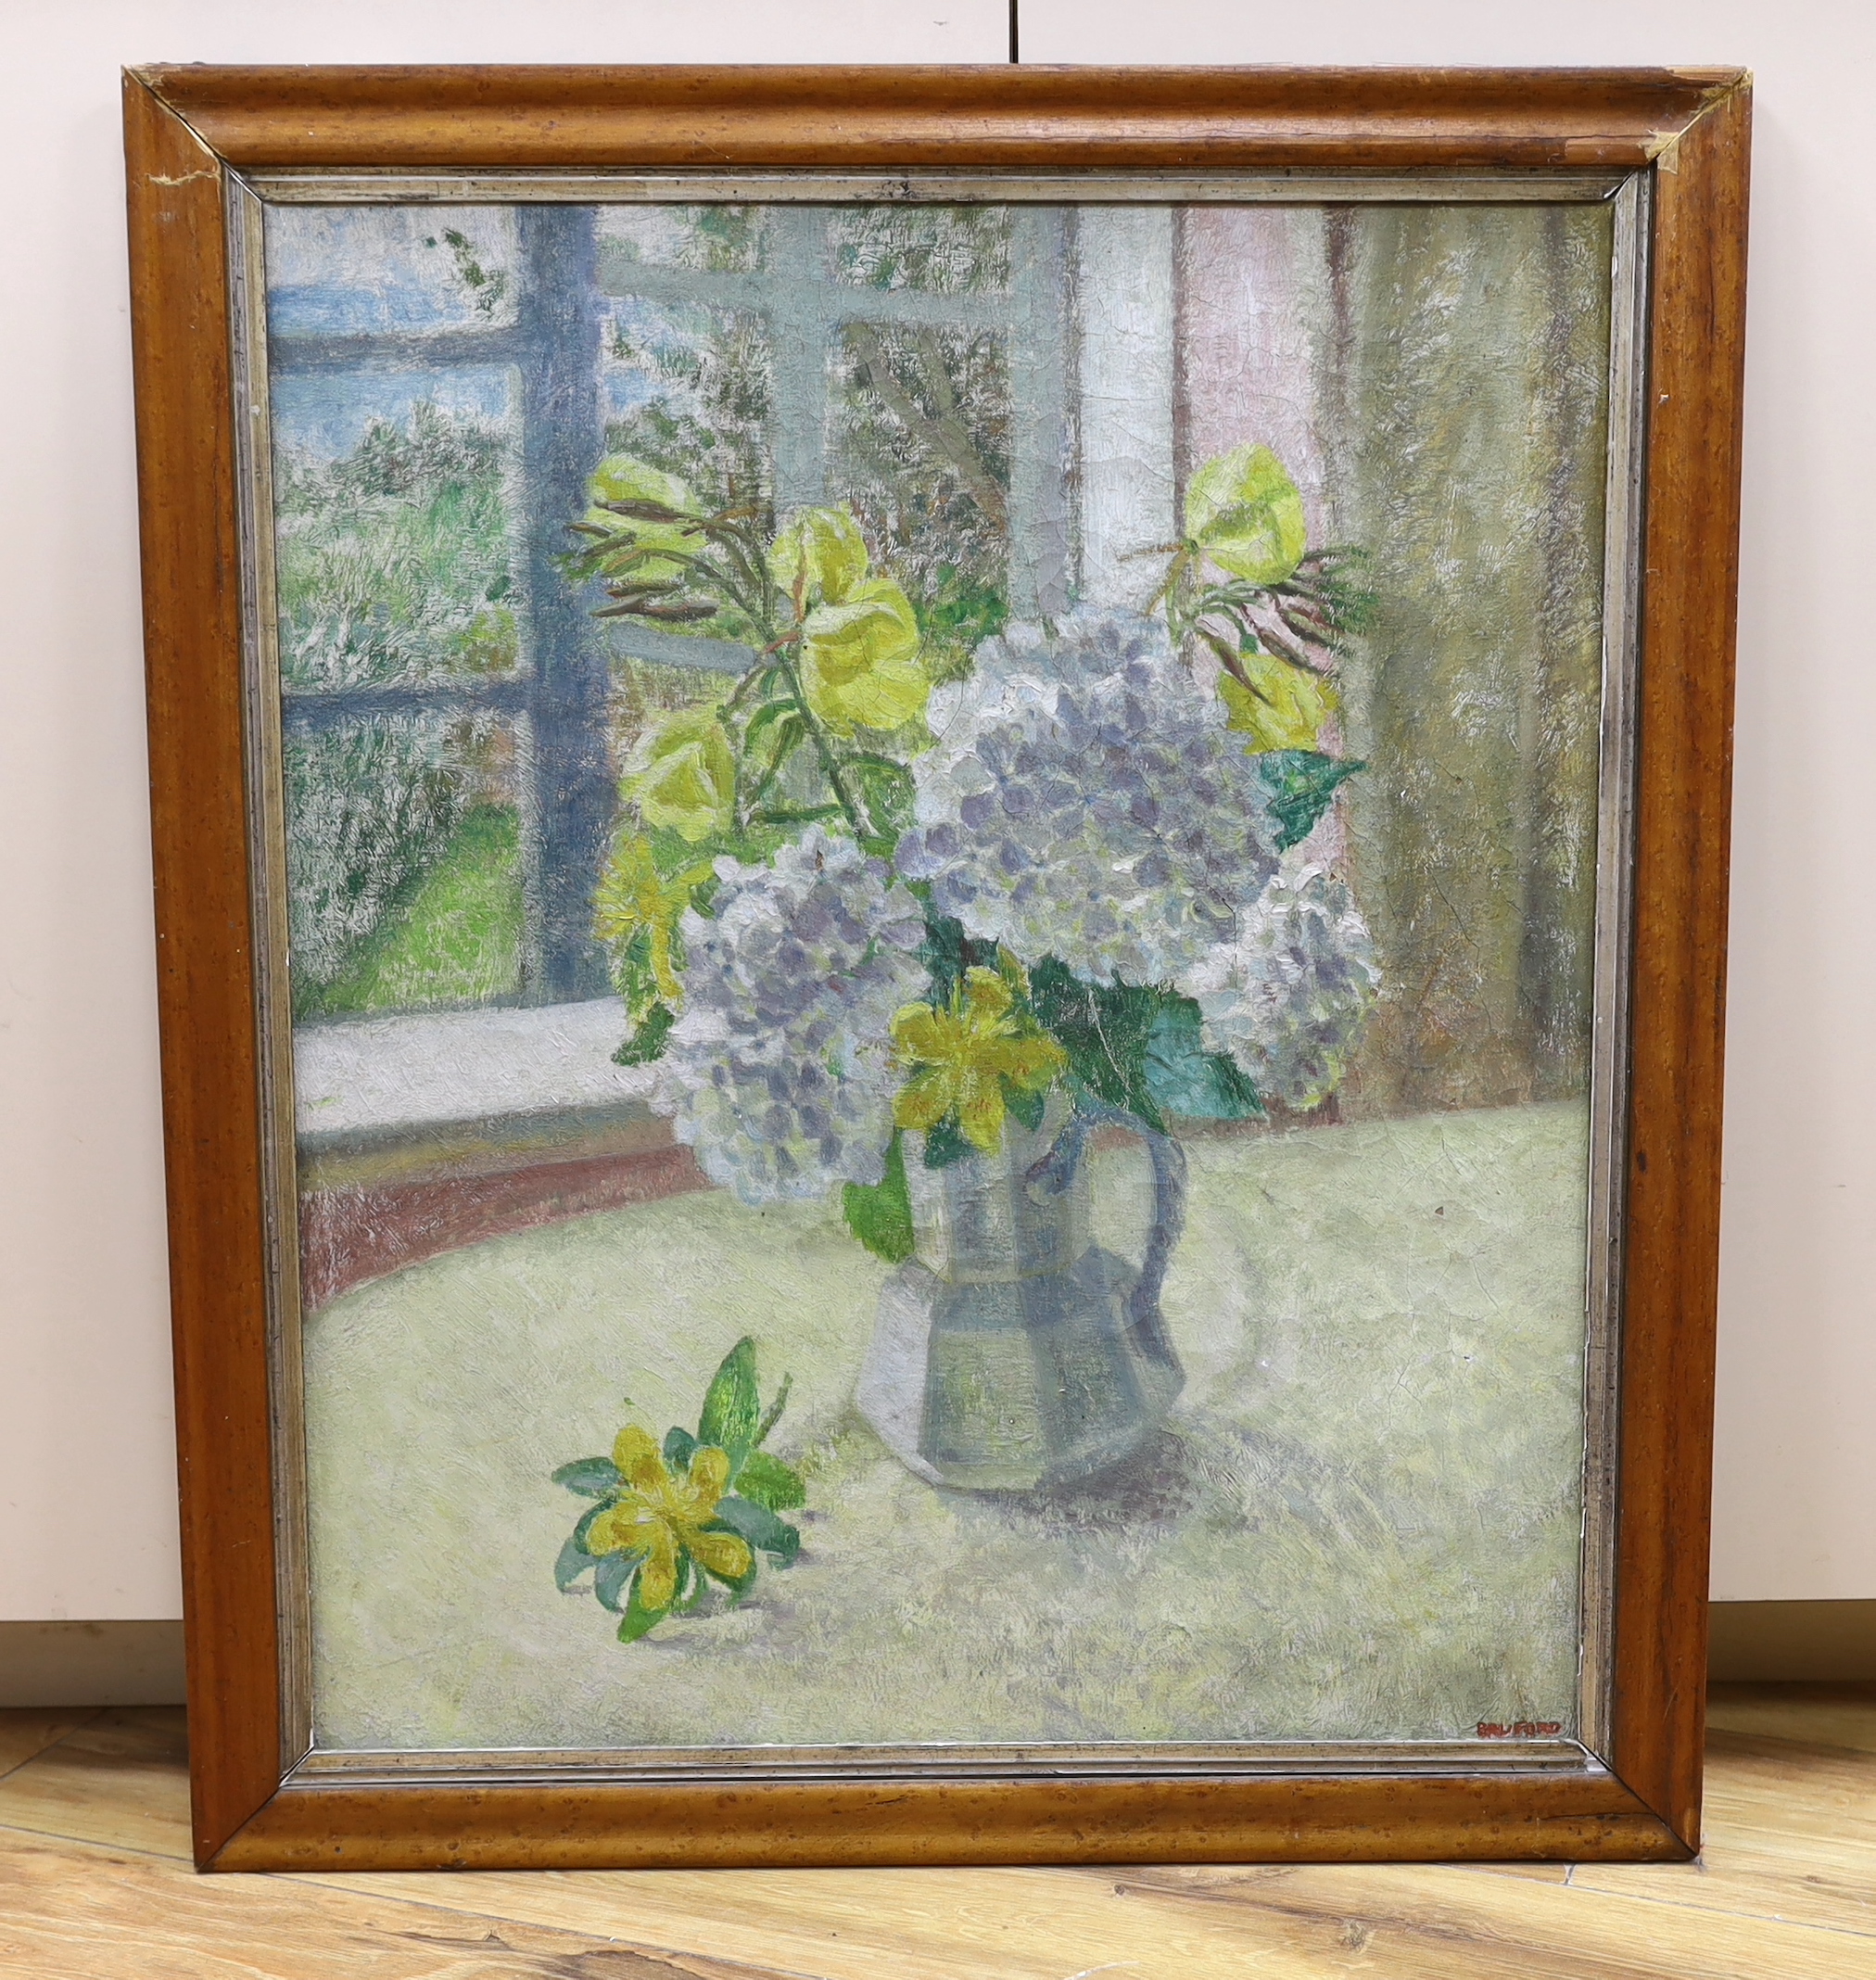 Marjorie Frances Bruford (Midge Bruford, 1902-1958) oil on canvas, Still life of flowers in a jug, signed, 58 x 48cm